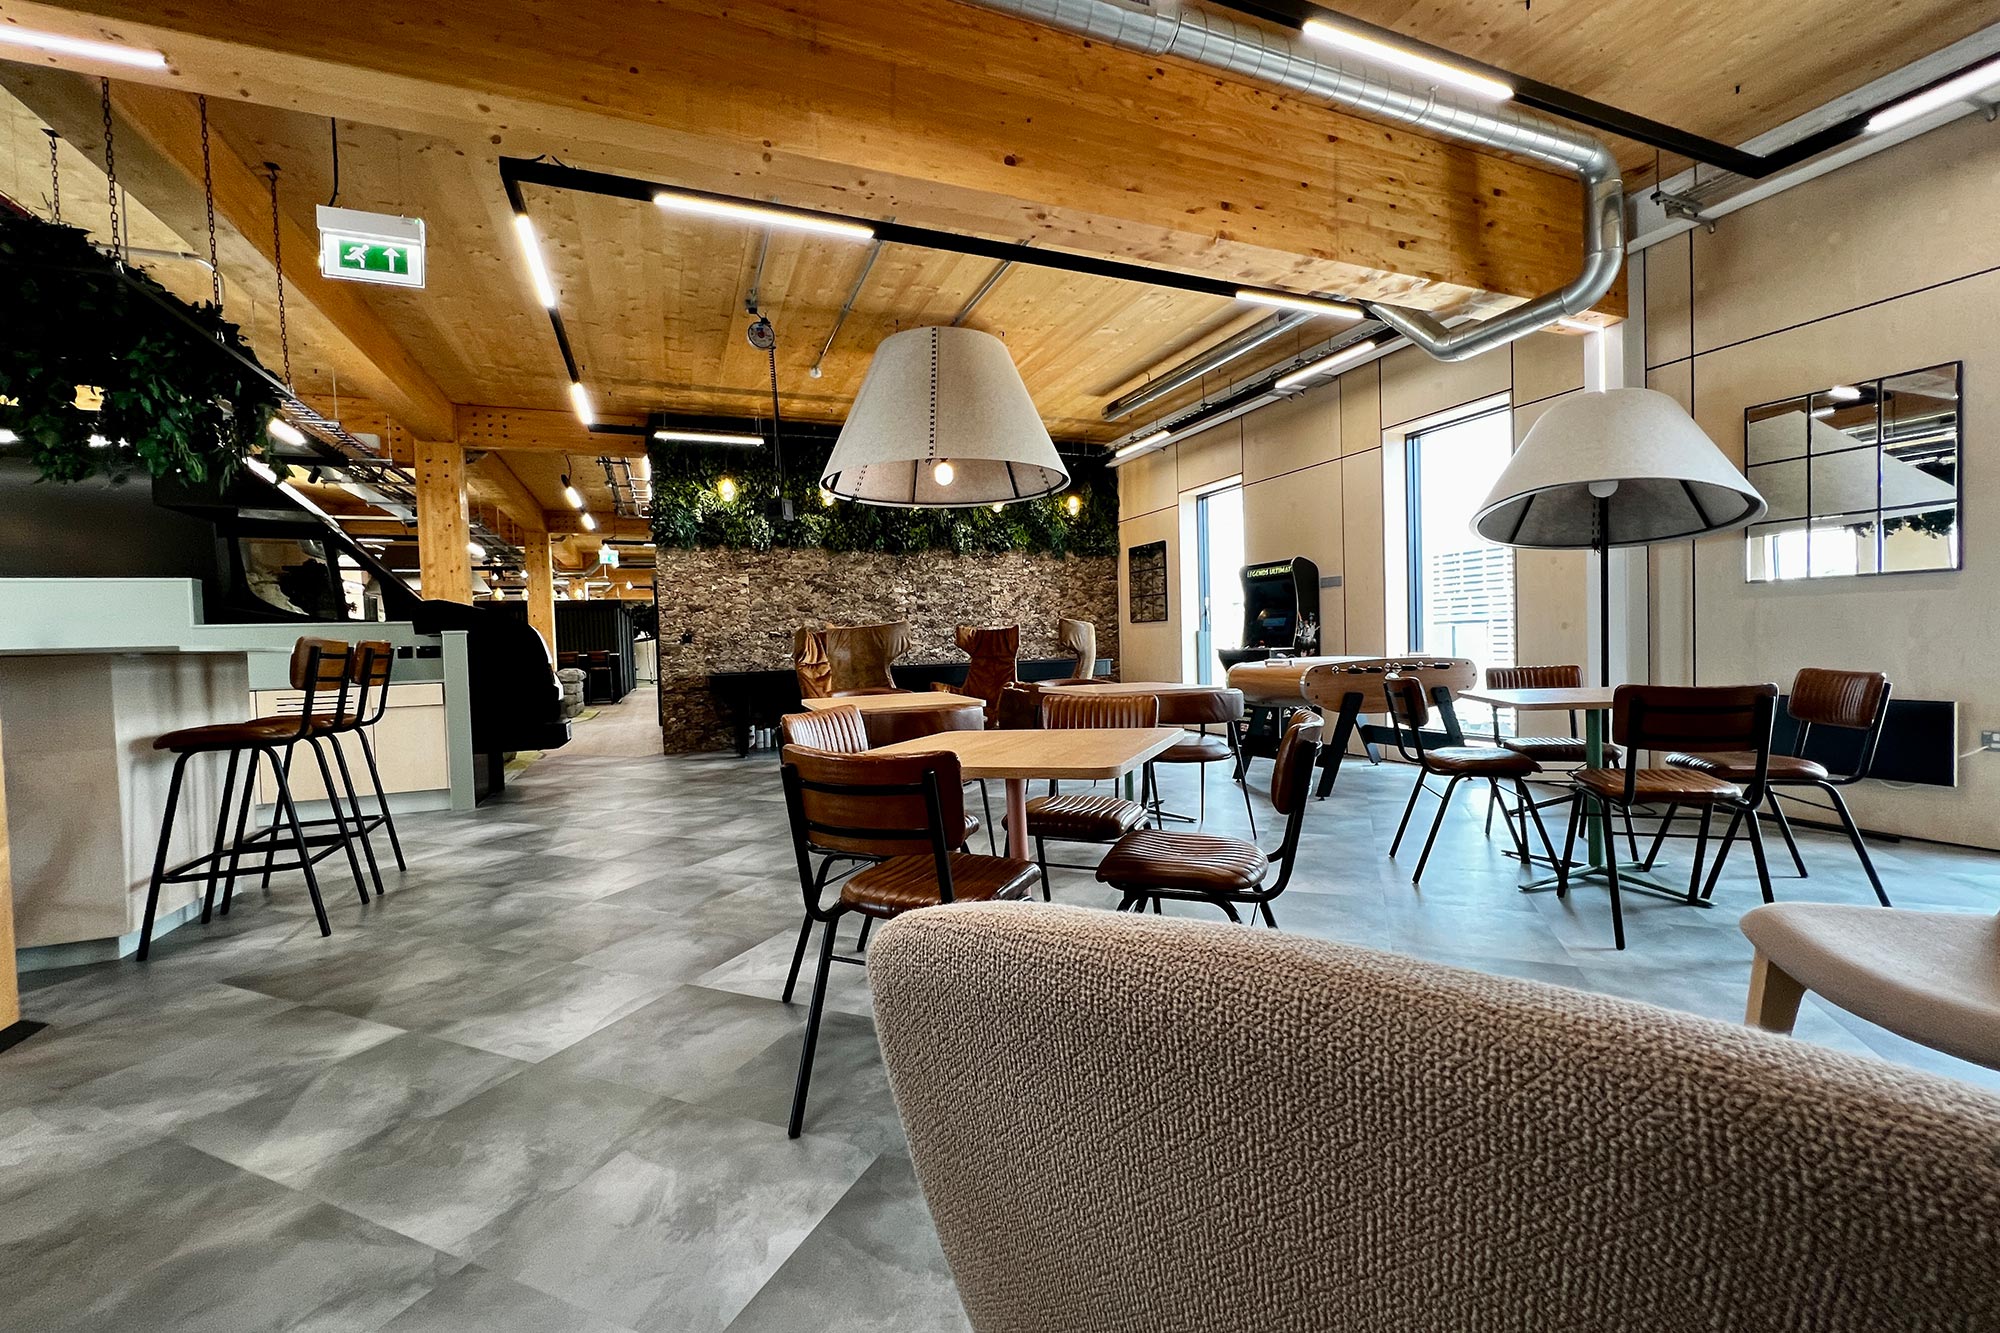 Yorkshire Housing - The Place restaurant area